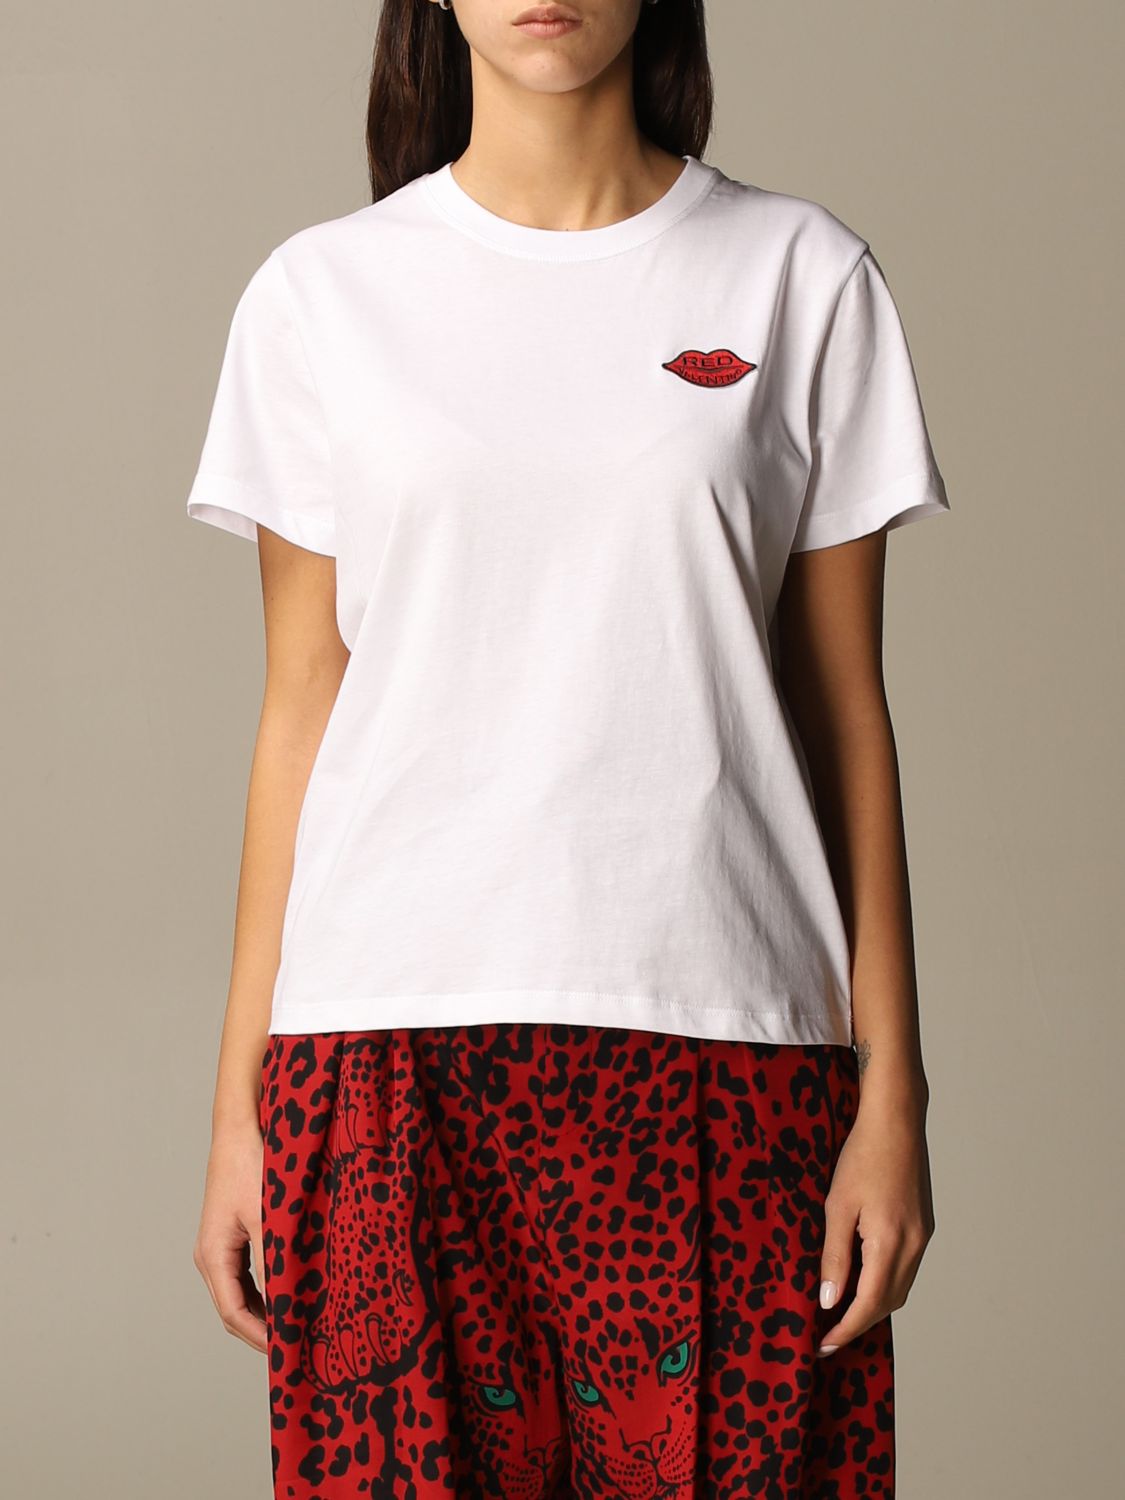 RED VALENTINO: T-shirt with mouth logo - White | Red Valentino t-shirt ...